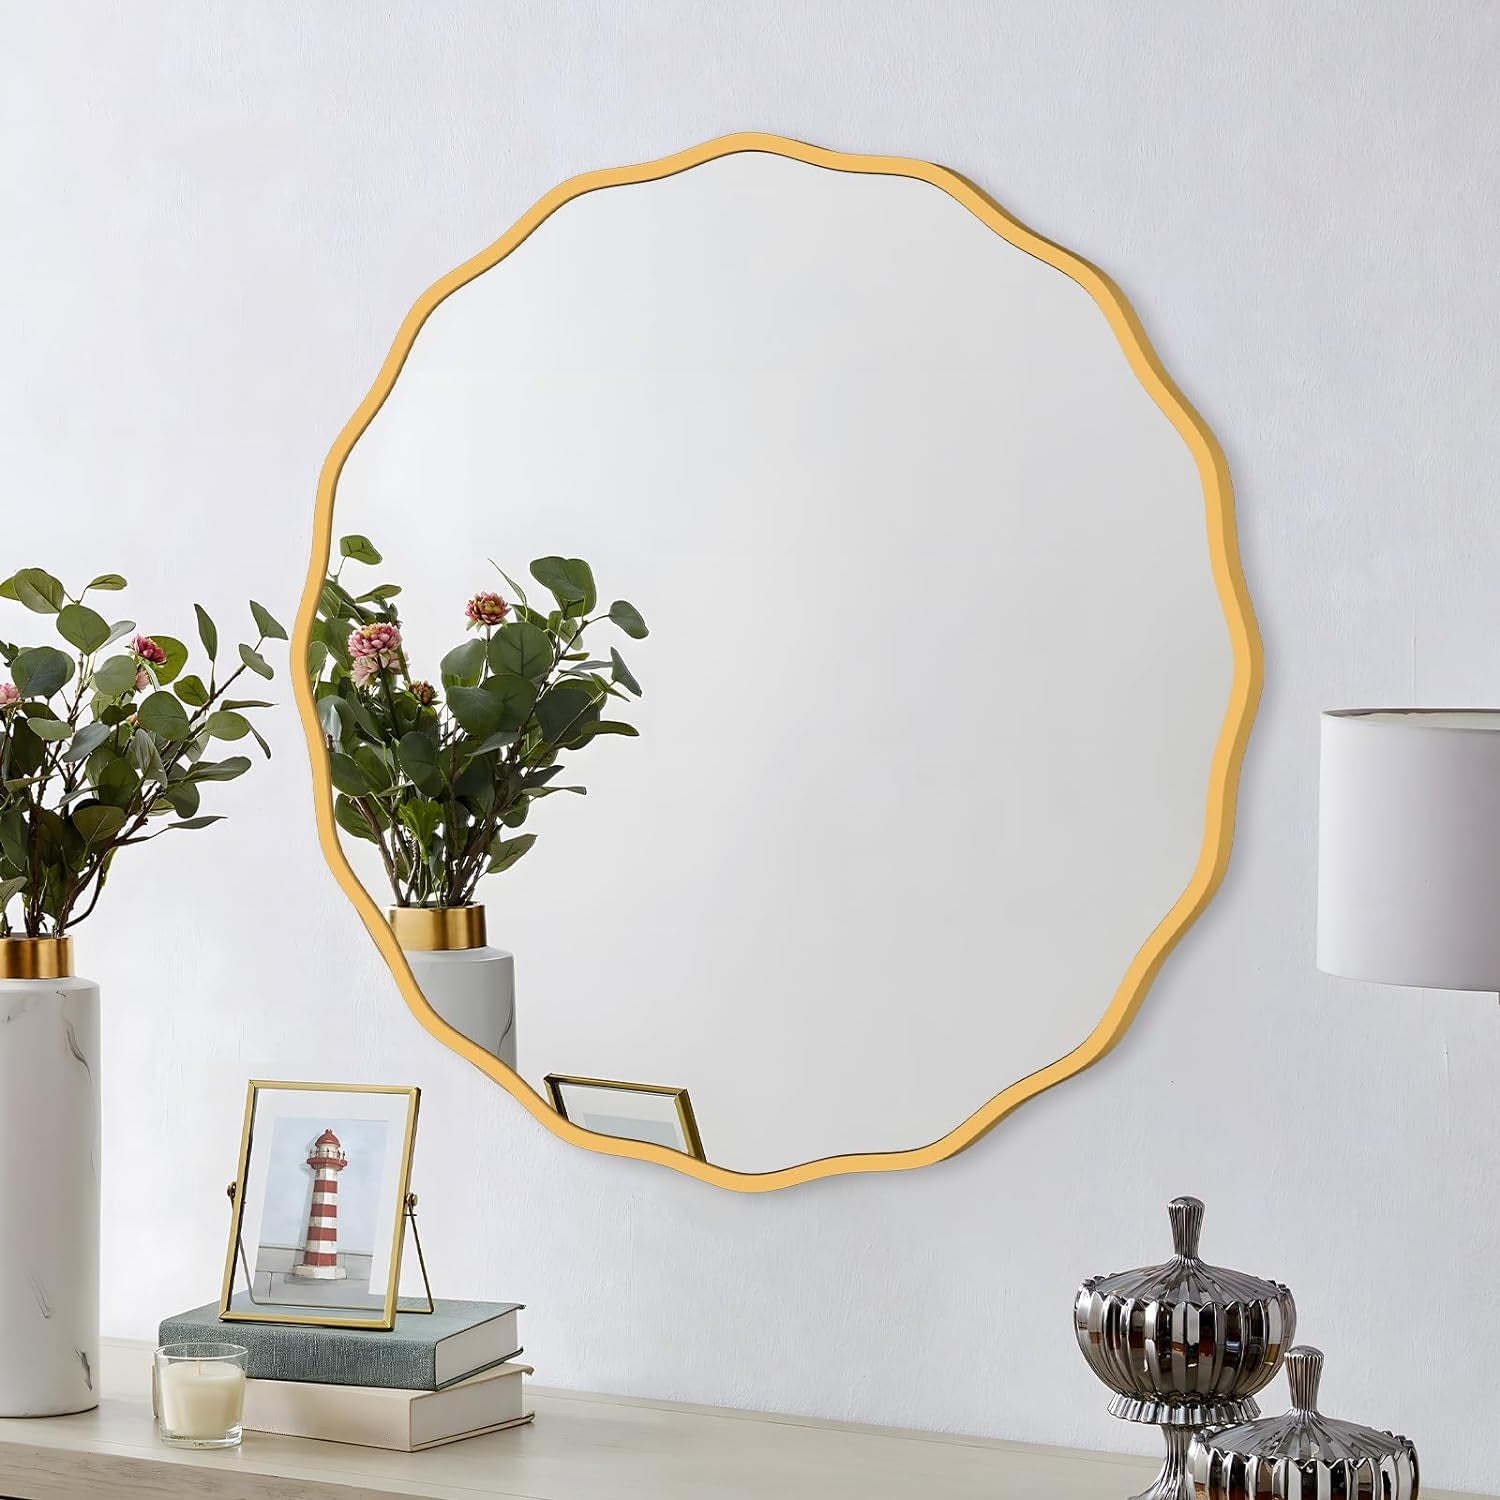 Gold round Mirror for Wall Decorative 24 Inch Modern Wavy Mirror Whit Wood Frame Circle Wall Mirror for Bathroom Bedroom Living Room Home House Office Entryway